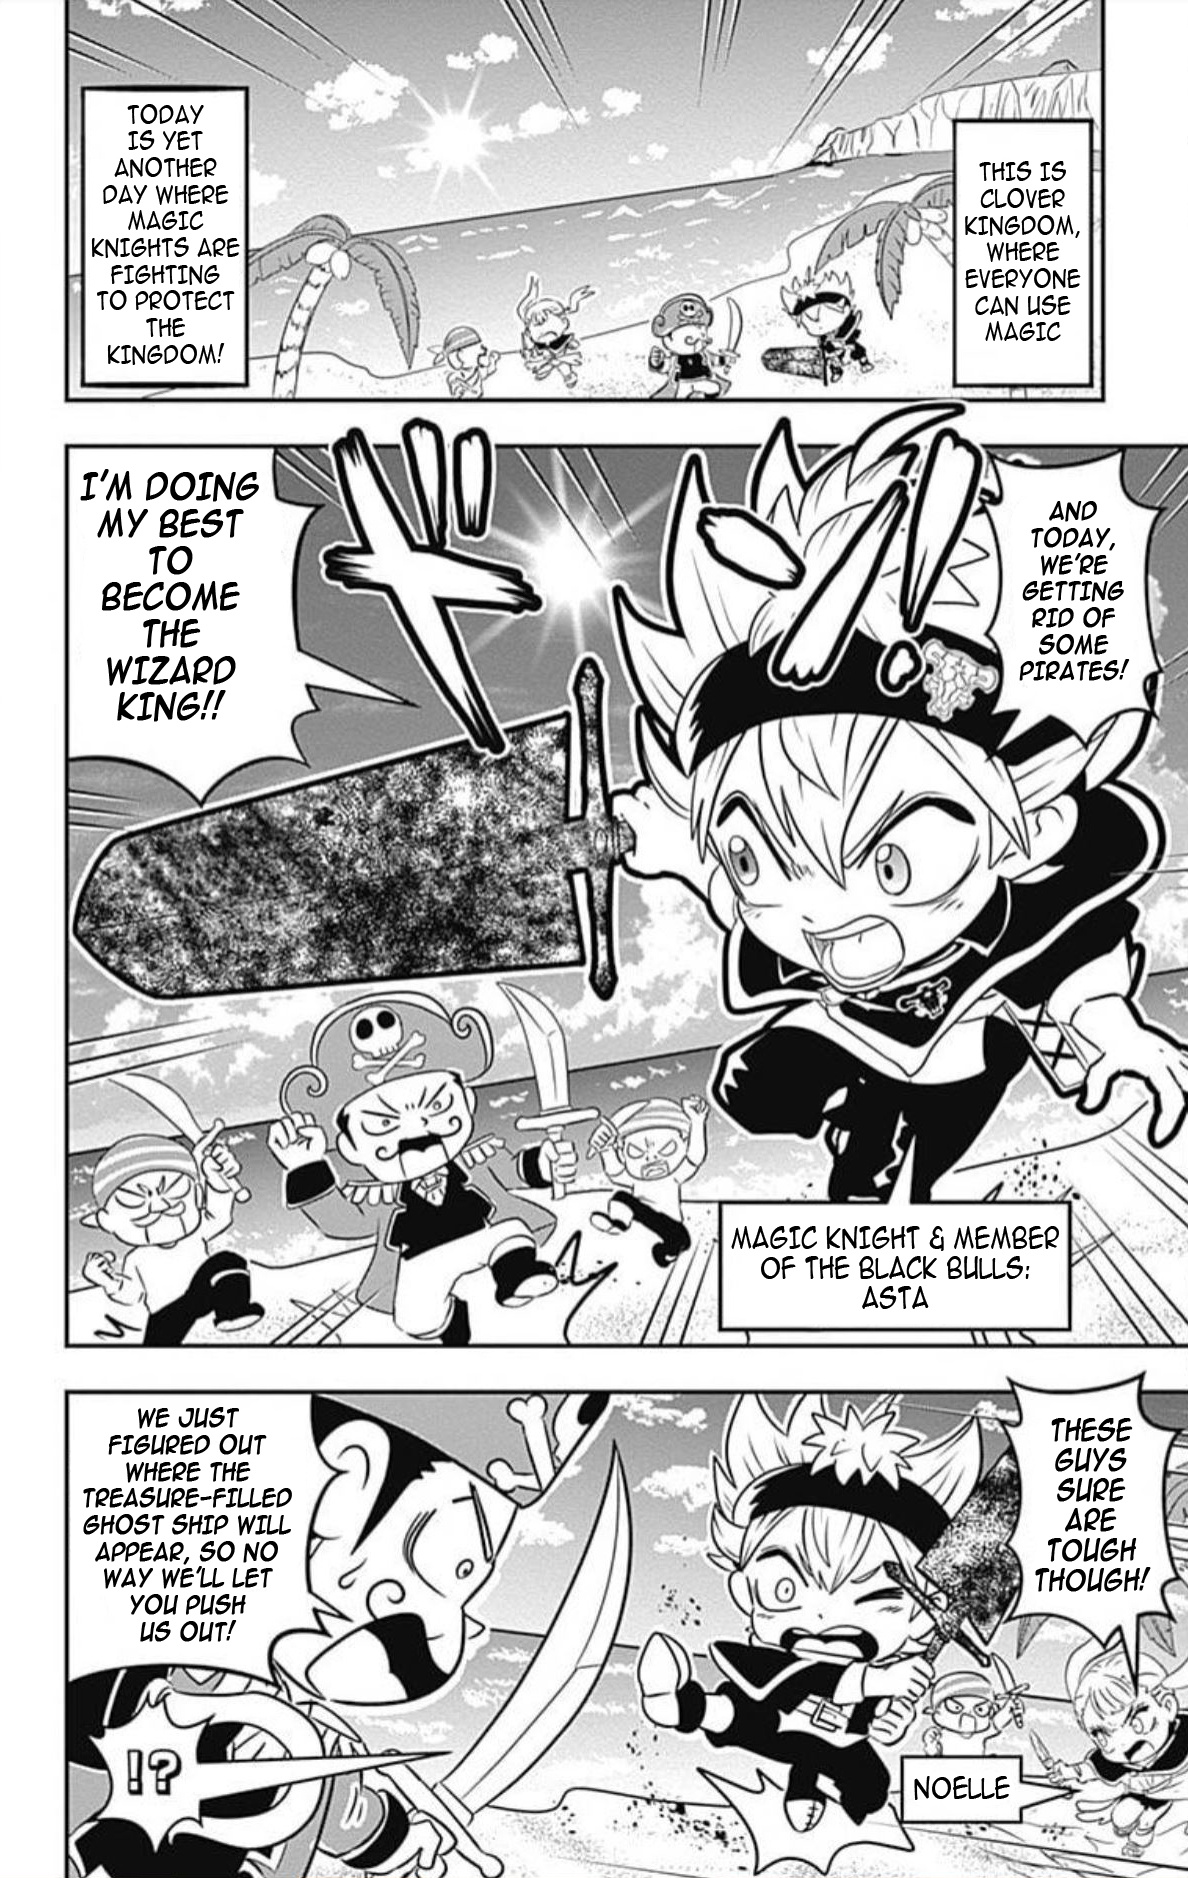 Black Clover Sd - Asta's Road To The Wizard King Vol.3 Chapter 11: Showdown At The Mysterious Ghost Ship!! - Picture 2